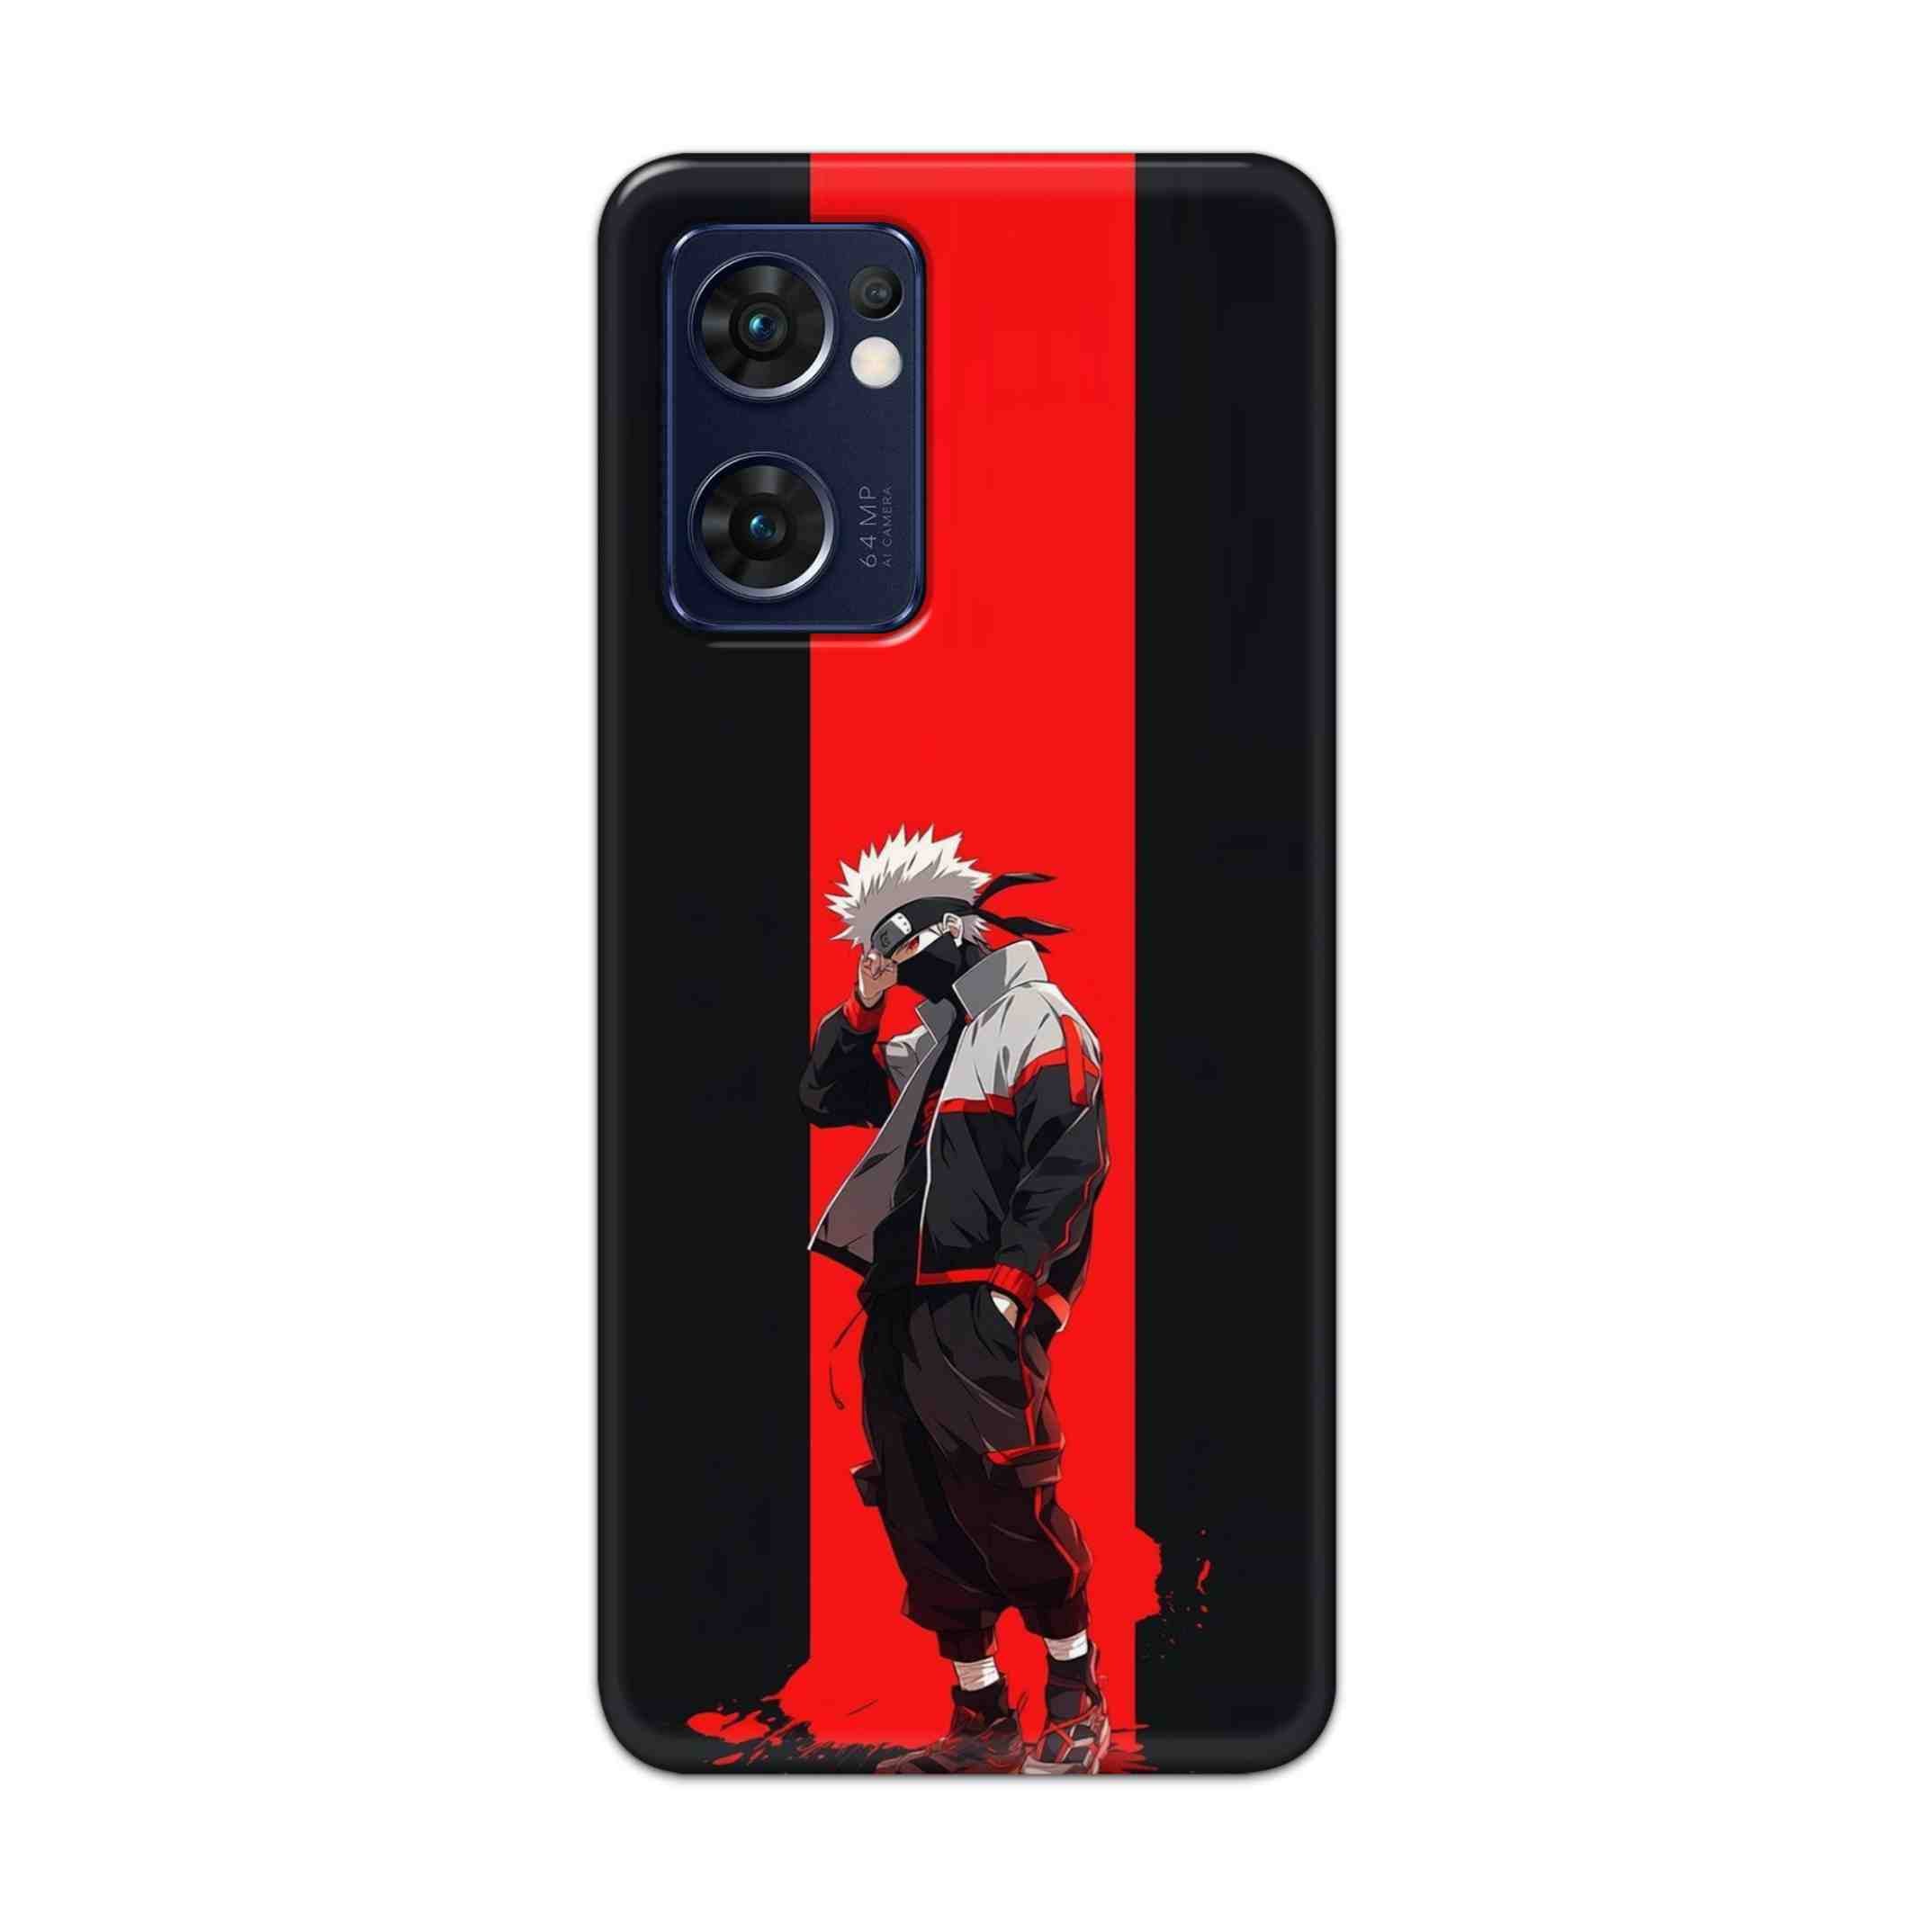 Buy Steins Hard Back Mobile Phone Case Cover For Reno 7 5G Online